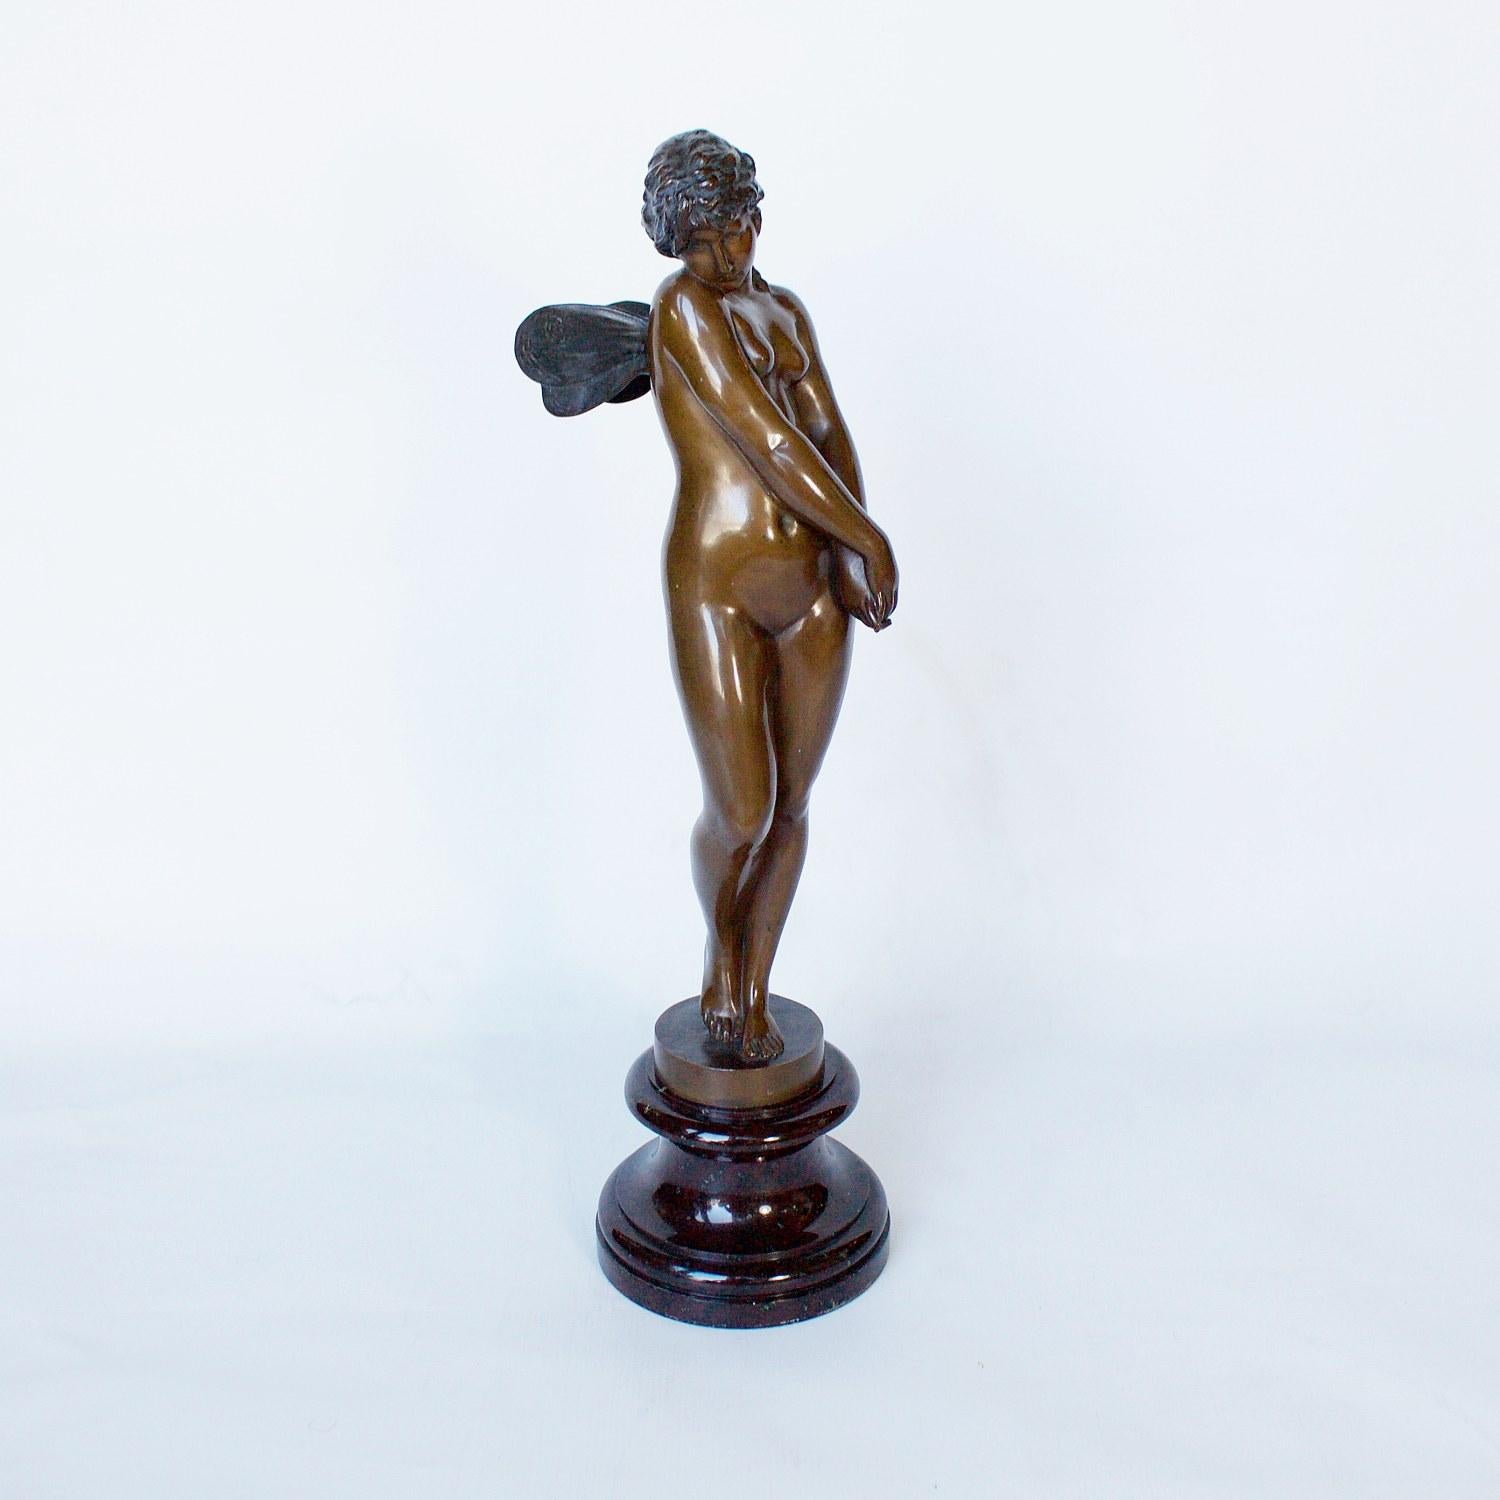 A patinated bronze figure of a winged Nymph interlocking her hands in a virtuous pose. Set over variegated marble plinth. Signed G.H. Eberlein to cast. 

Artist: Gustav Heinrich Eberlein (1847-1926)

Dimensions: H 41.5 cm, W 11 cm, D 14